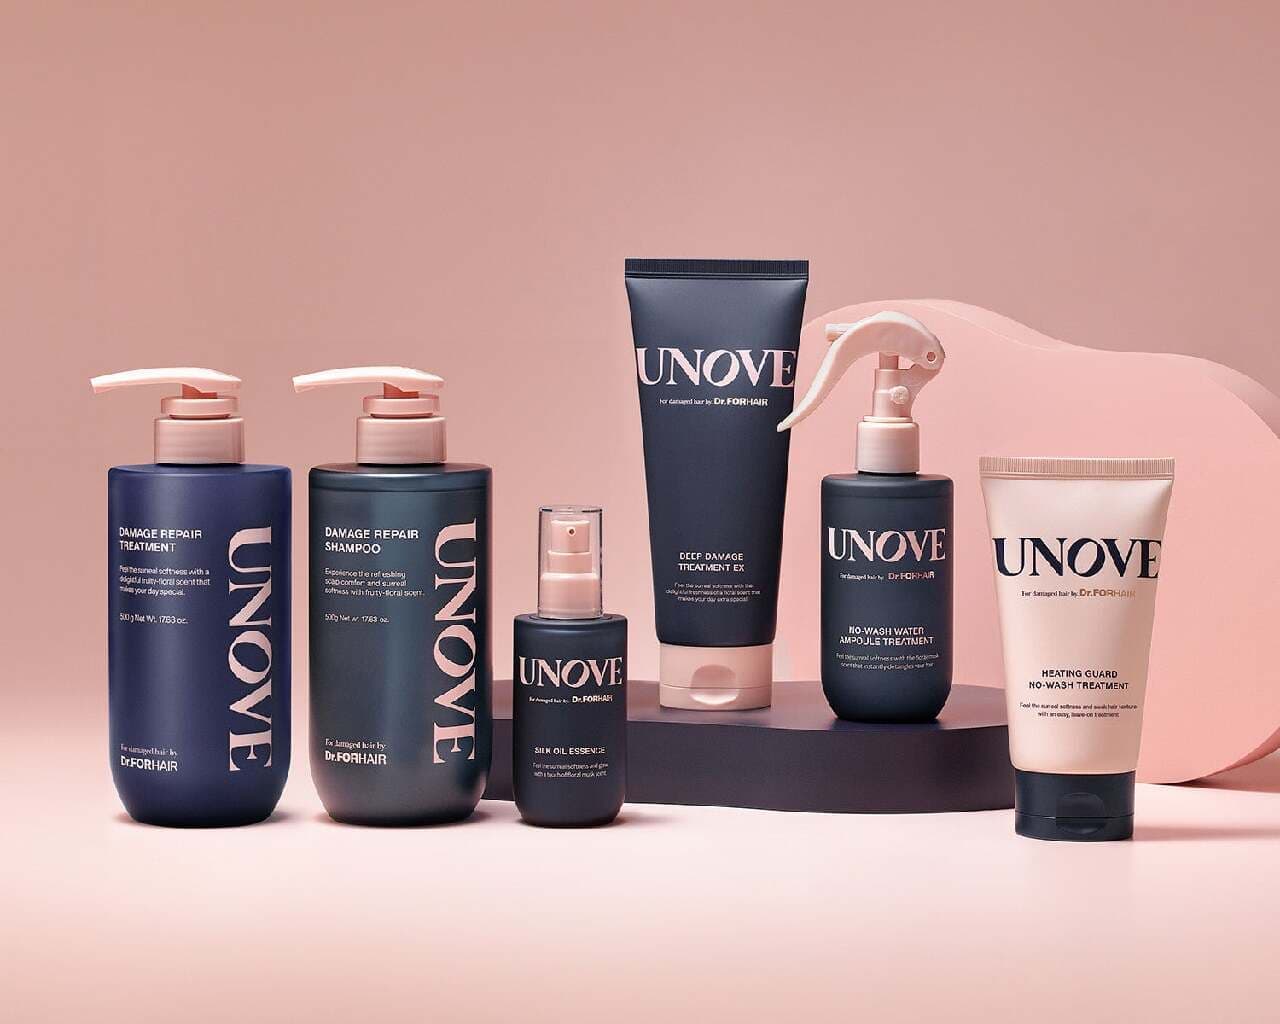 Wyatt Co., Ltd. launches "UNOVE," a hair care brand from Korea, for the first time in Japan, with a total of 11 products, including limited editions, on April 10 Image 1